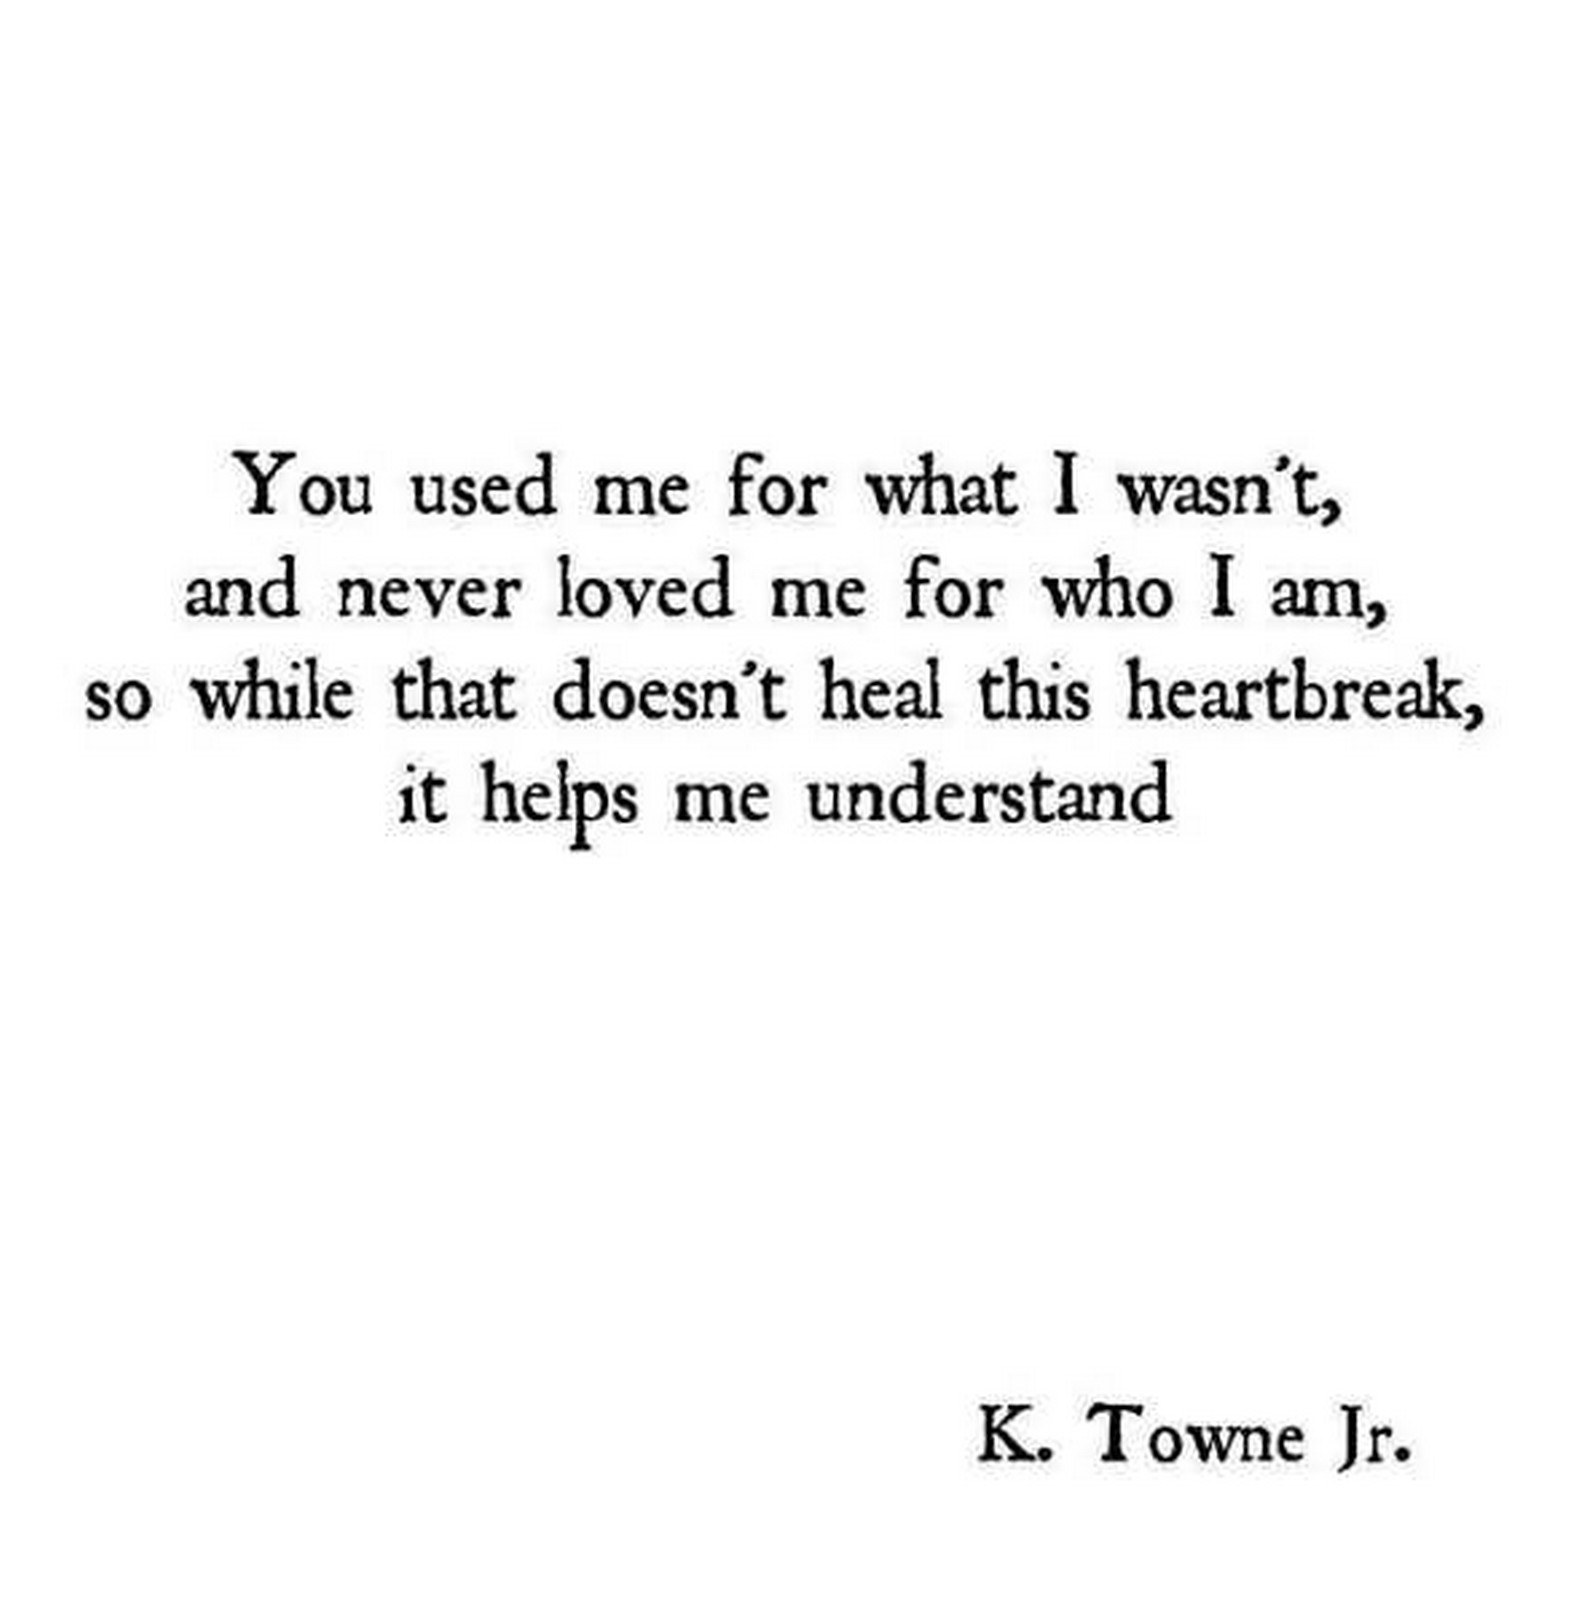 55 Romantic Quotes - "You used me for what I wasn't, and never love me for who I am, so while that doesn't heal this heartbreak, it helps me understand." - K. Towne Jr.